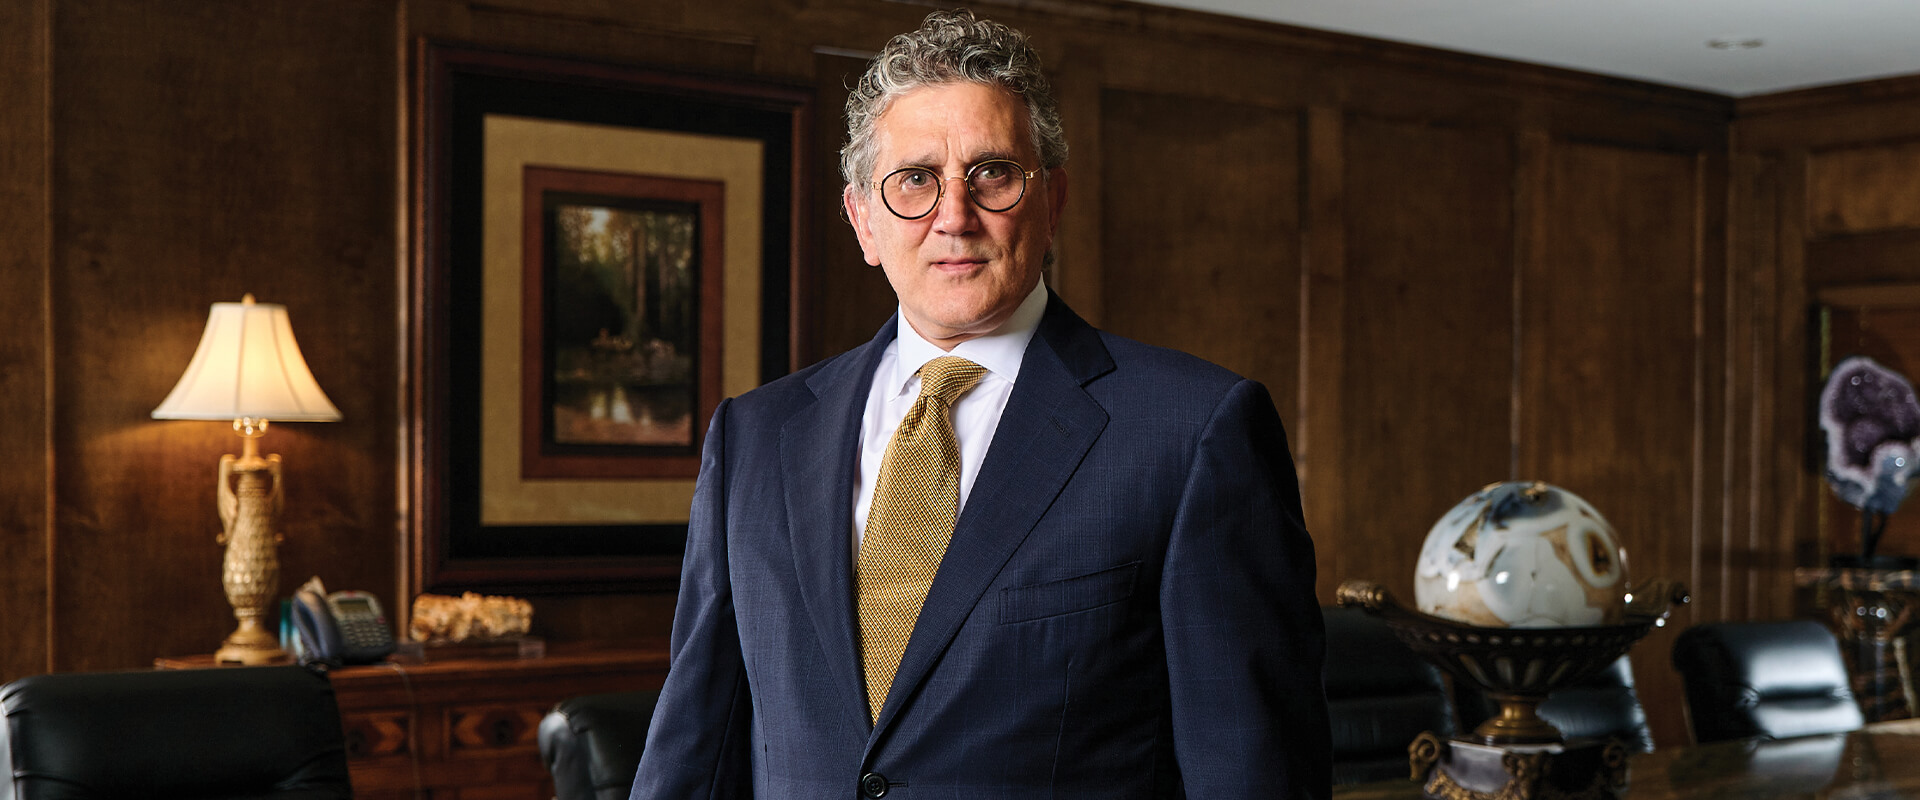 C. Gregory Shamoun, once on the verge of academic dismissal, has become a sought-after attorney in North Texas.